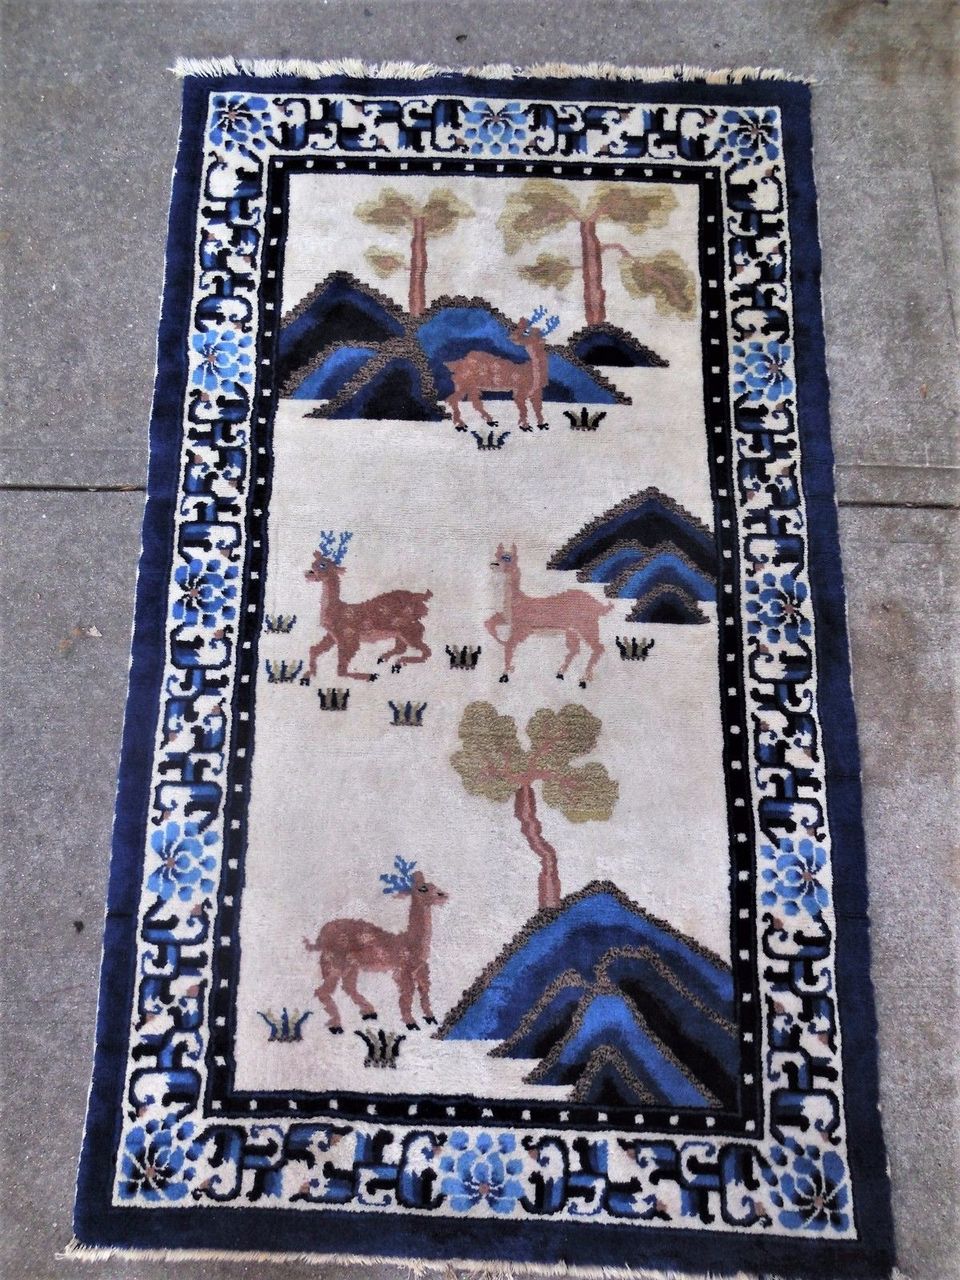 ANTIQUE CHINESE DECO RUG with figurative deer - blues on white [3x5] oriental VG